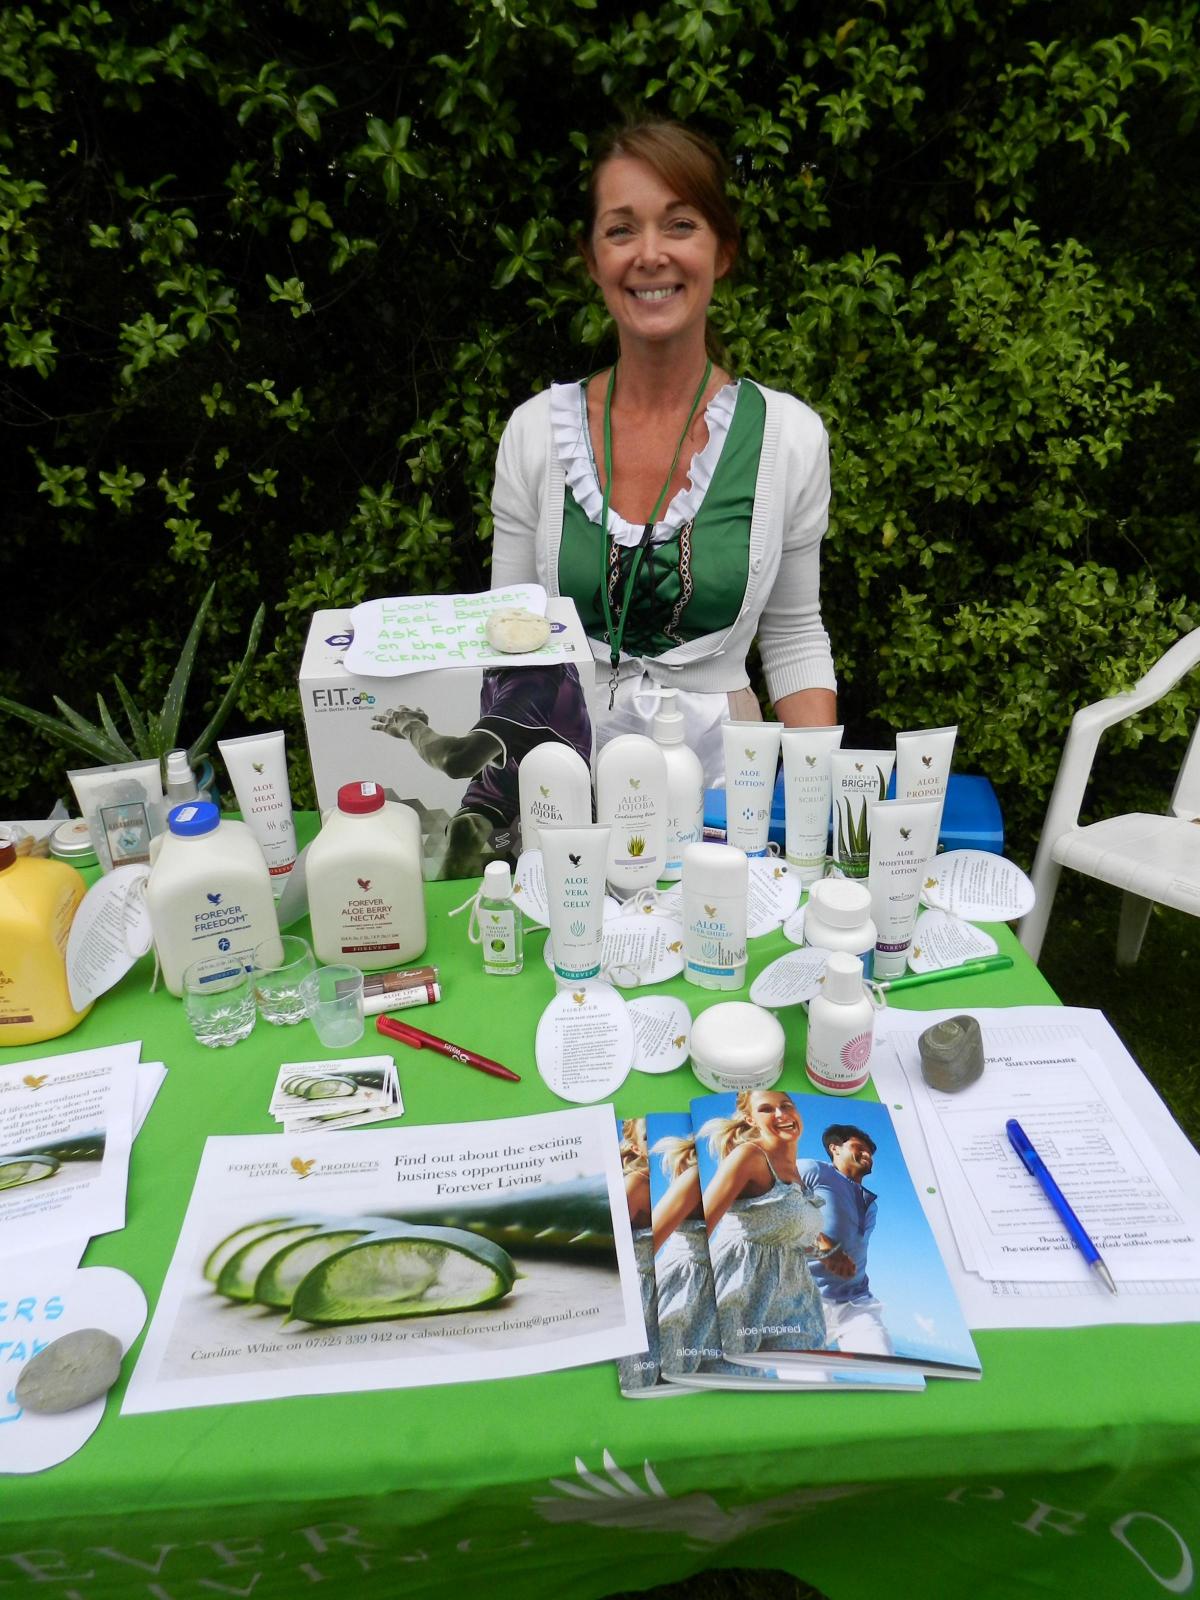 Caroline White - Forever Living Aloe Vera products  at Llandstadwell Medieval Fayre, Saturday June 20, 2015. 
PICTURE: Western Telegraph/Milford Mercury